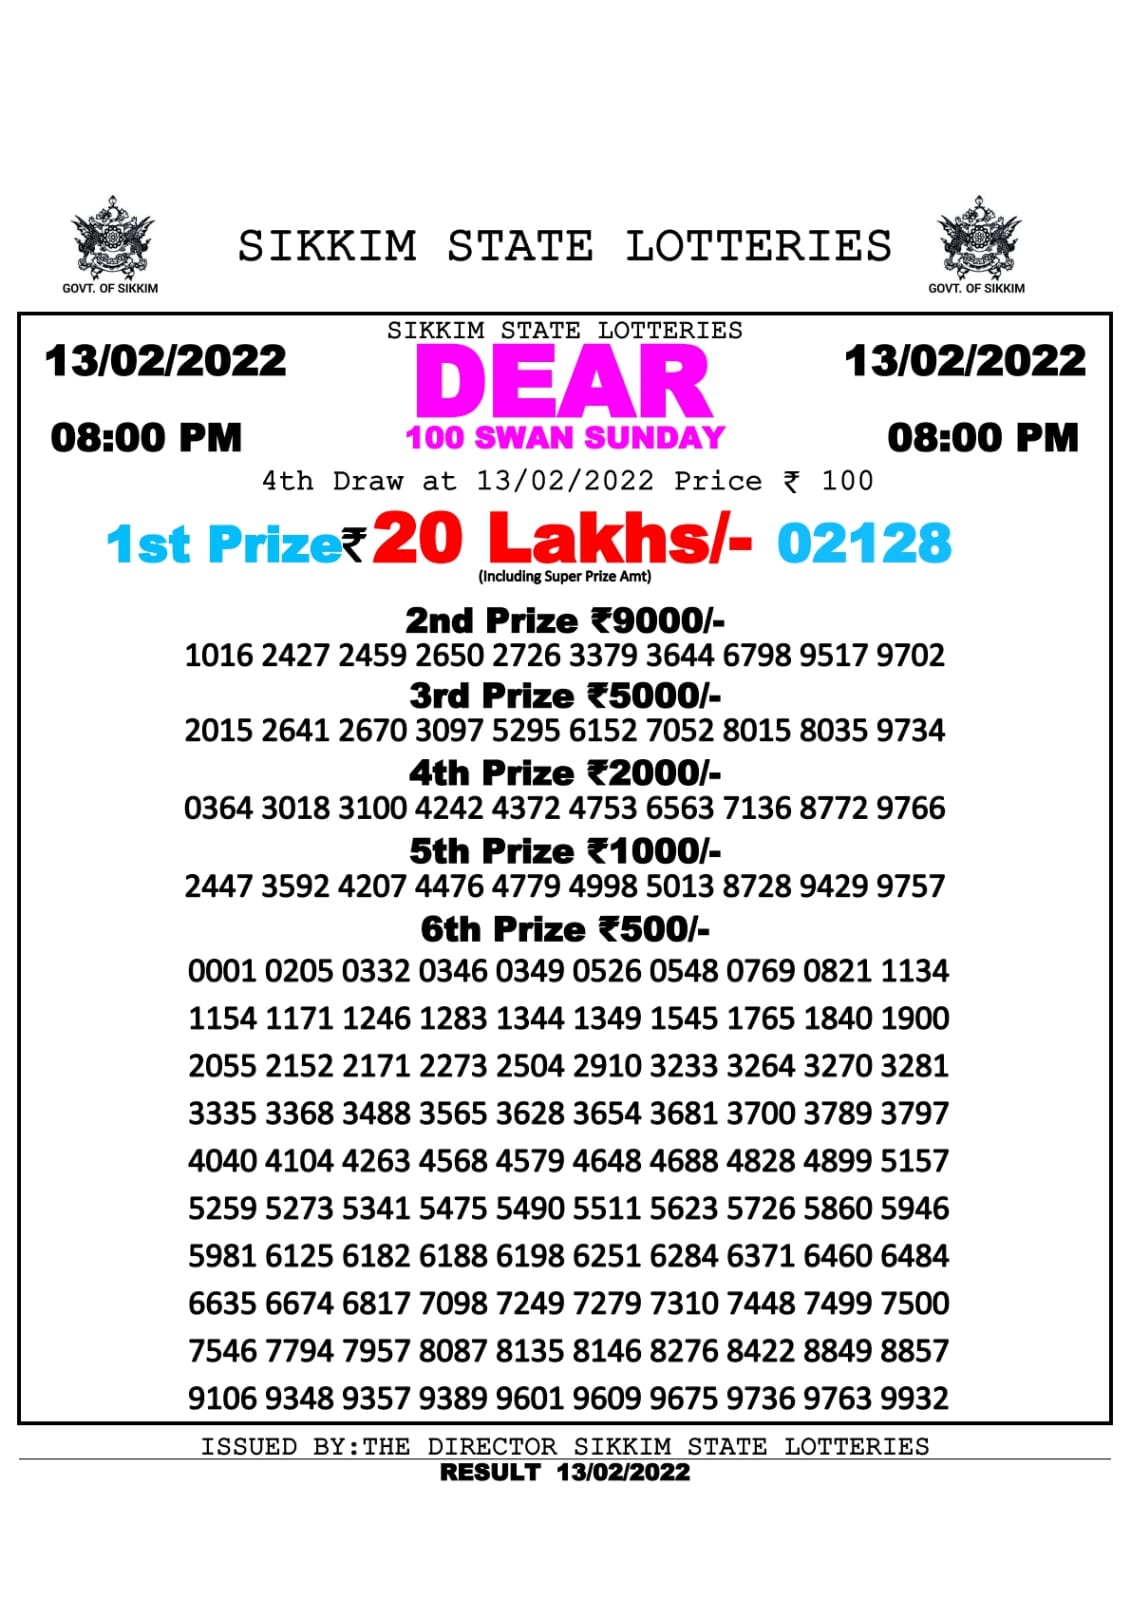 DEAR 100 WEEKLY RESULT 8.00PM 13.02.2022